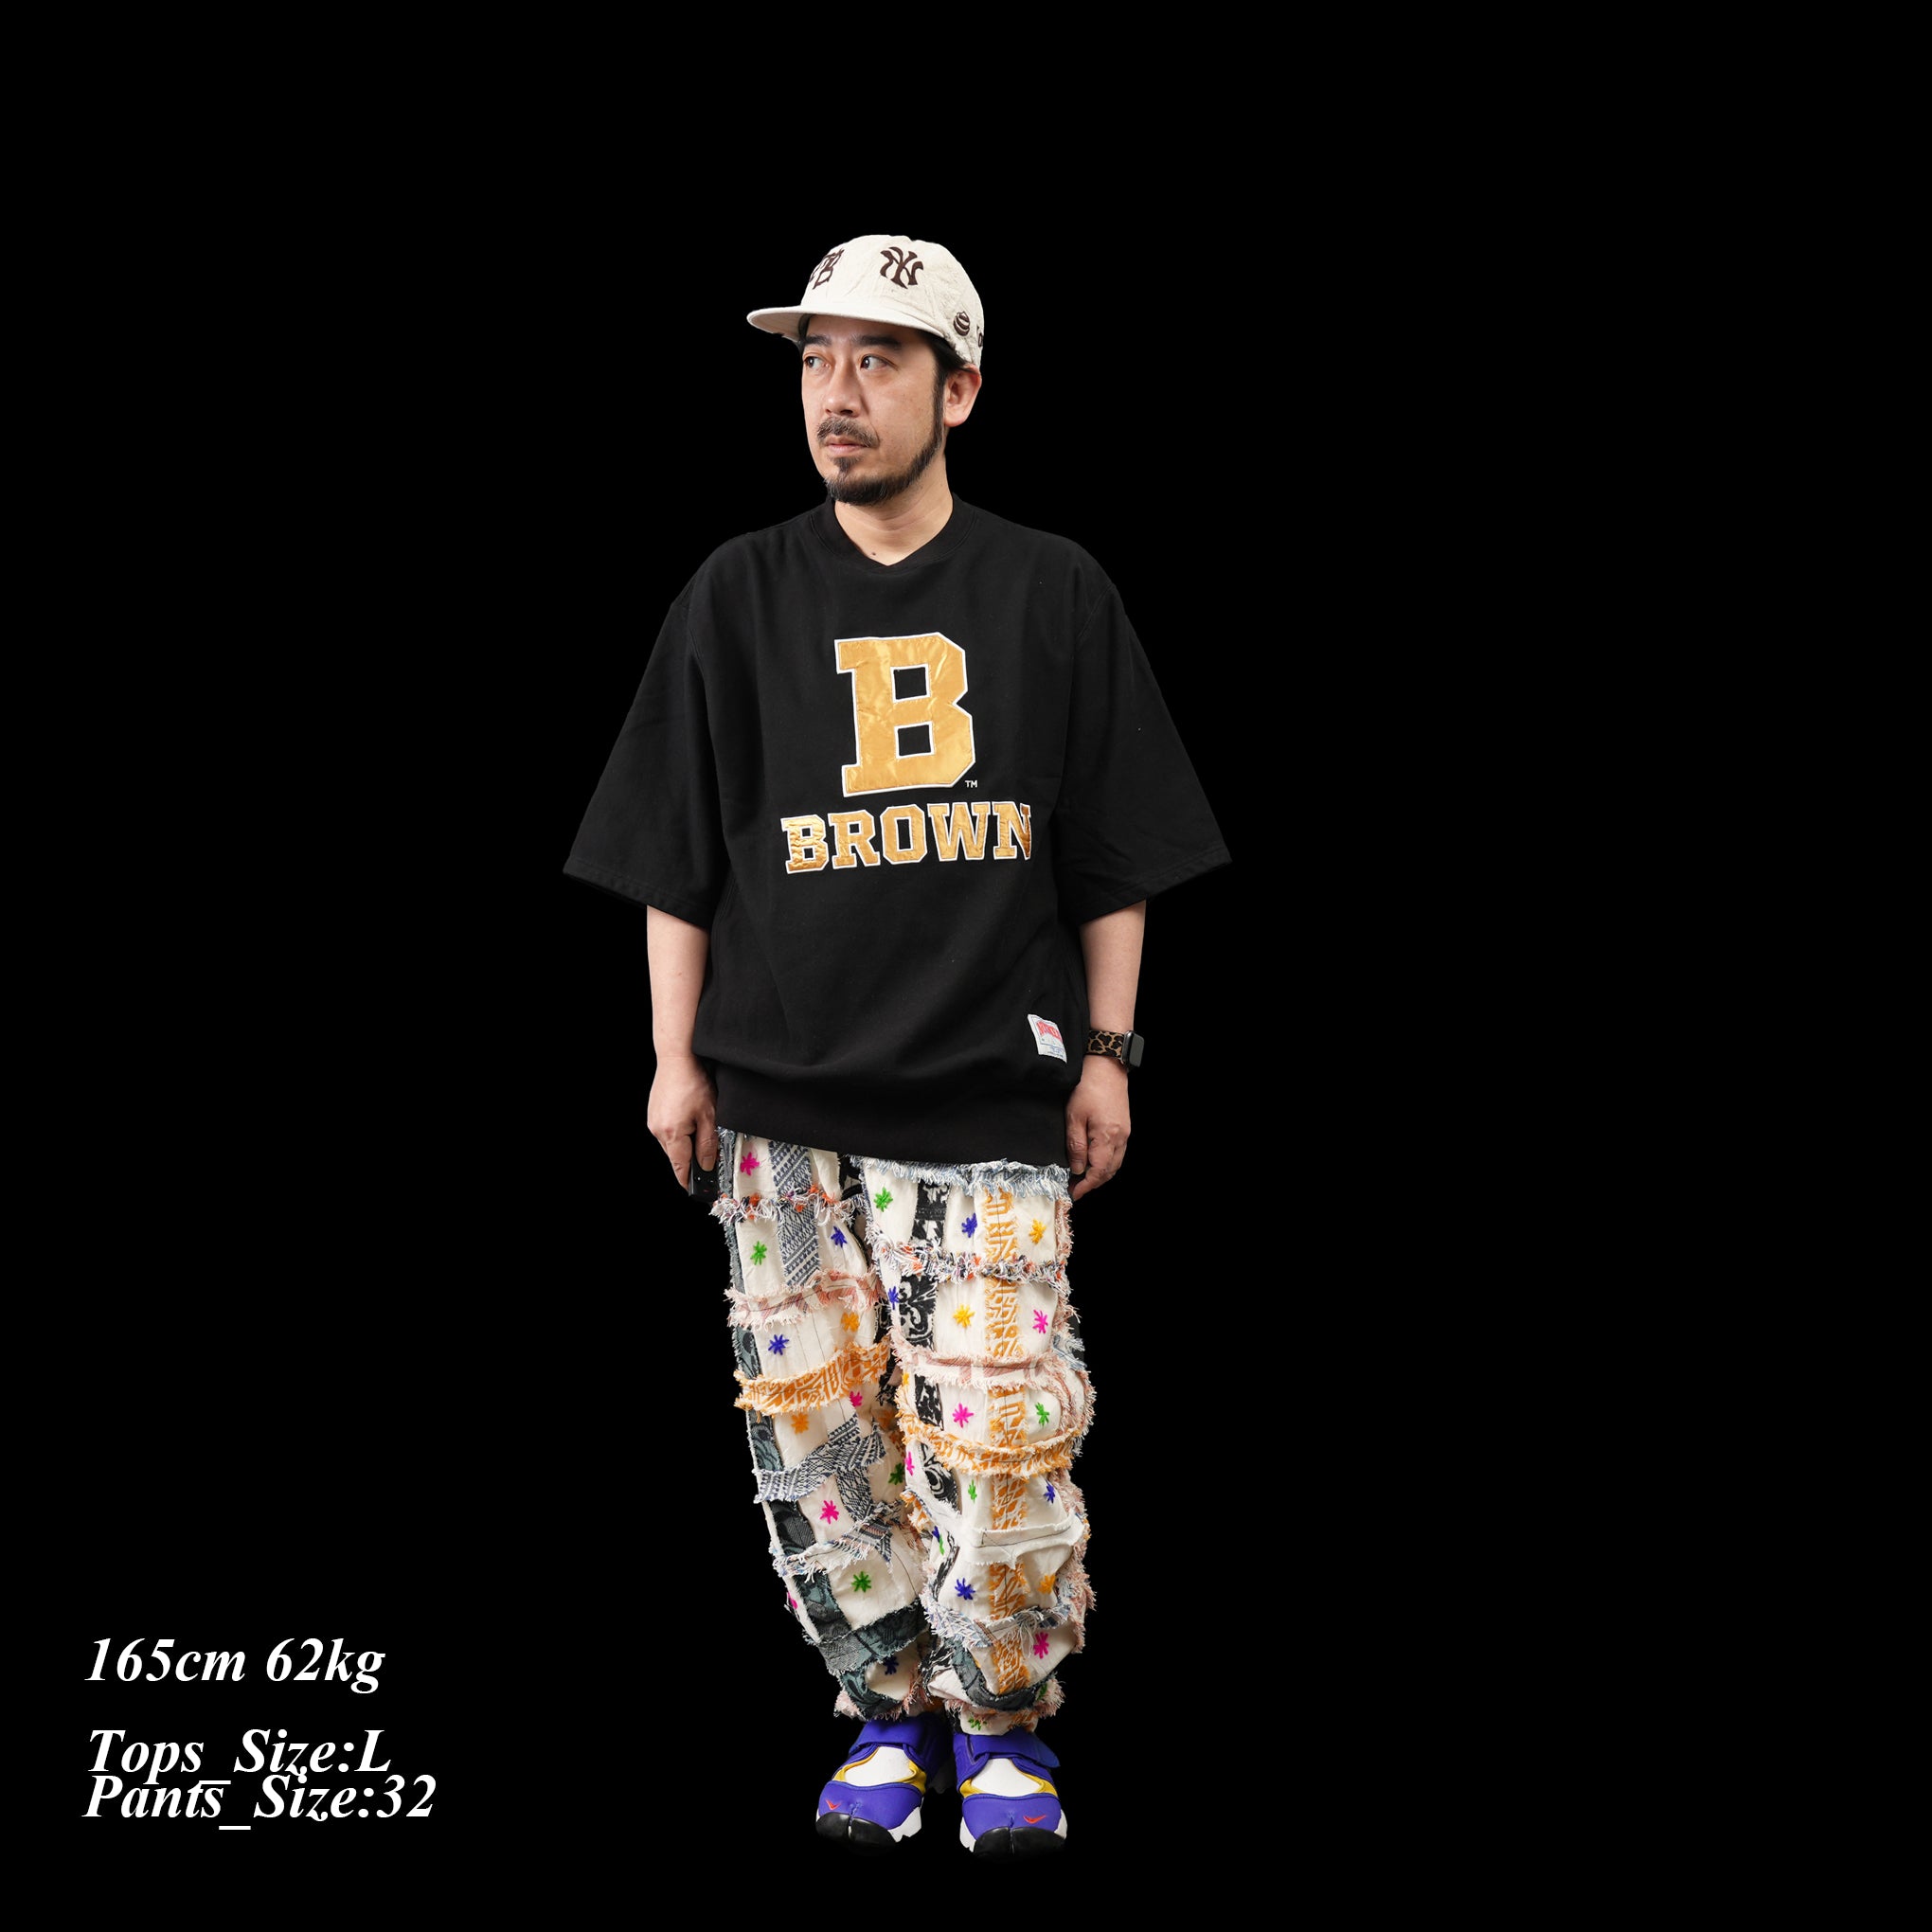 No:nm23s011_b | Name:80s ss crew college sweat | Color:Black-Brown【NUTMEG MILLS_ナツメグミルズ】